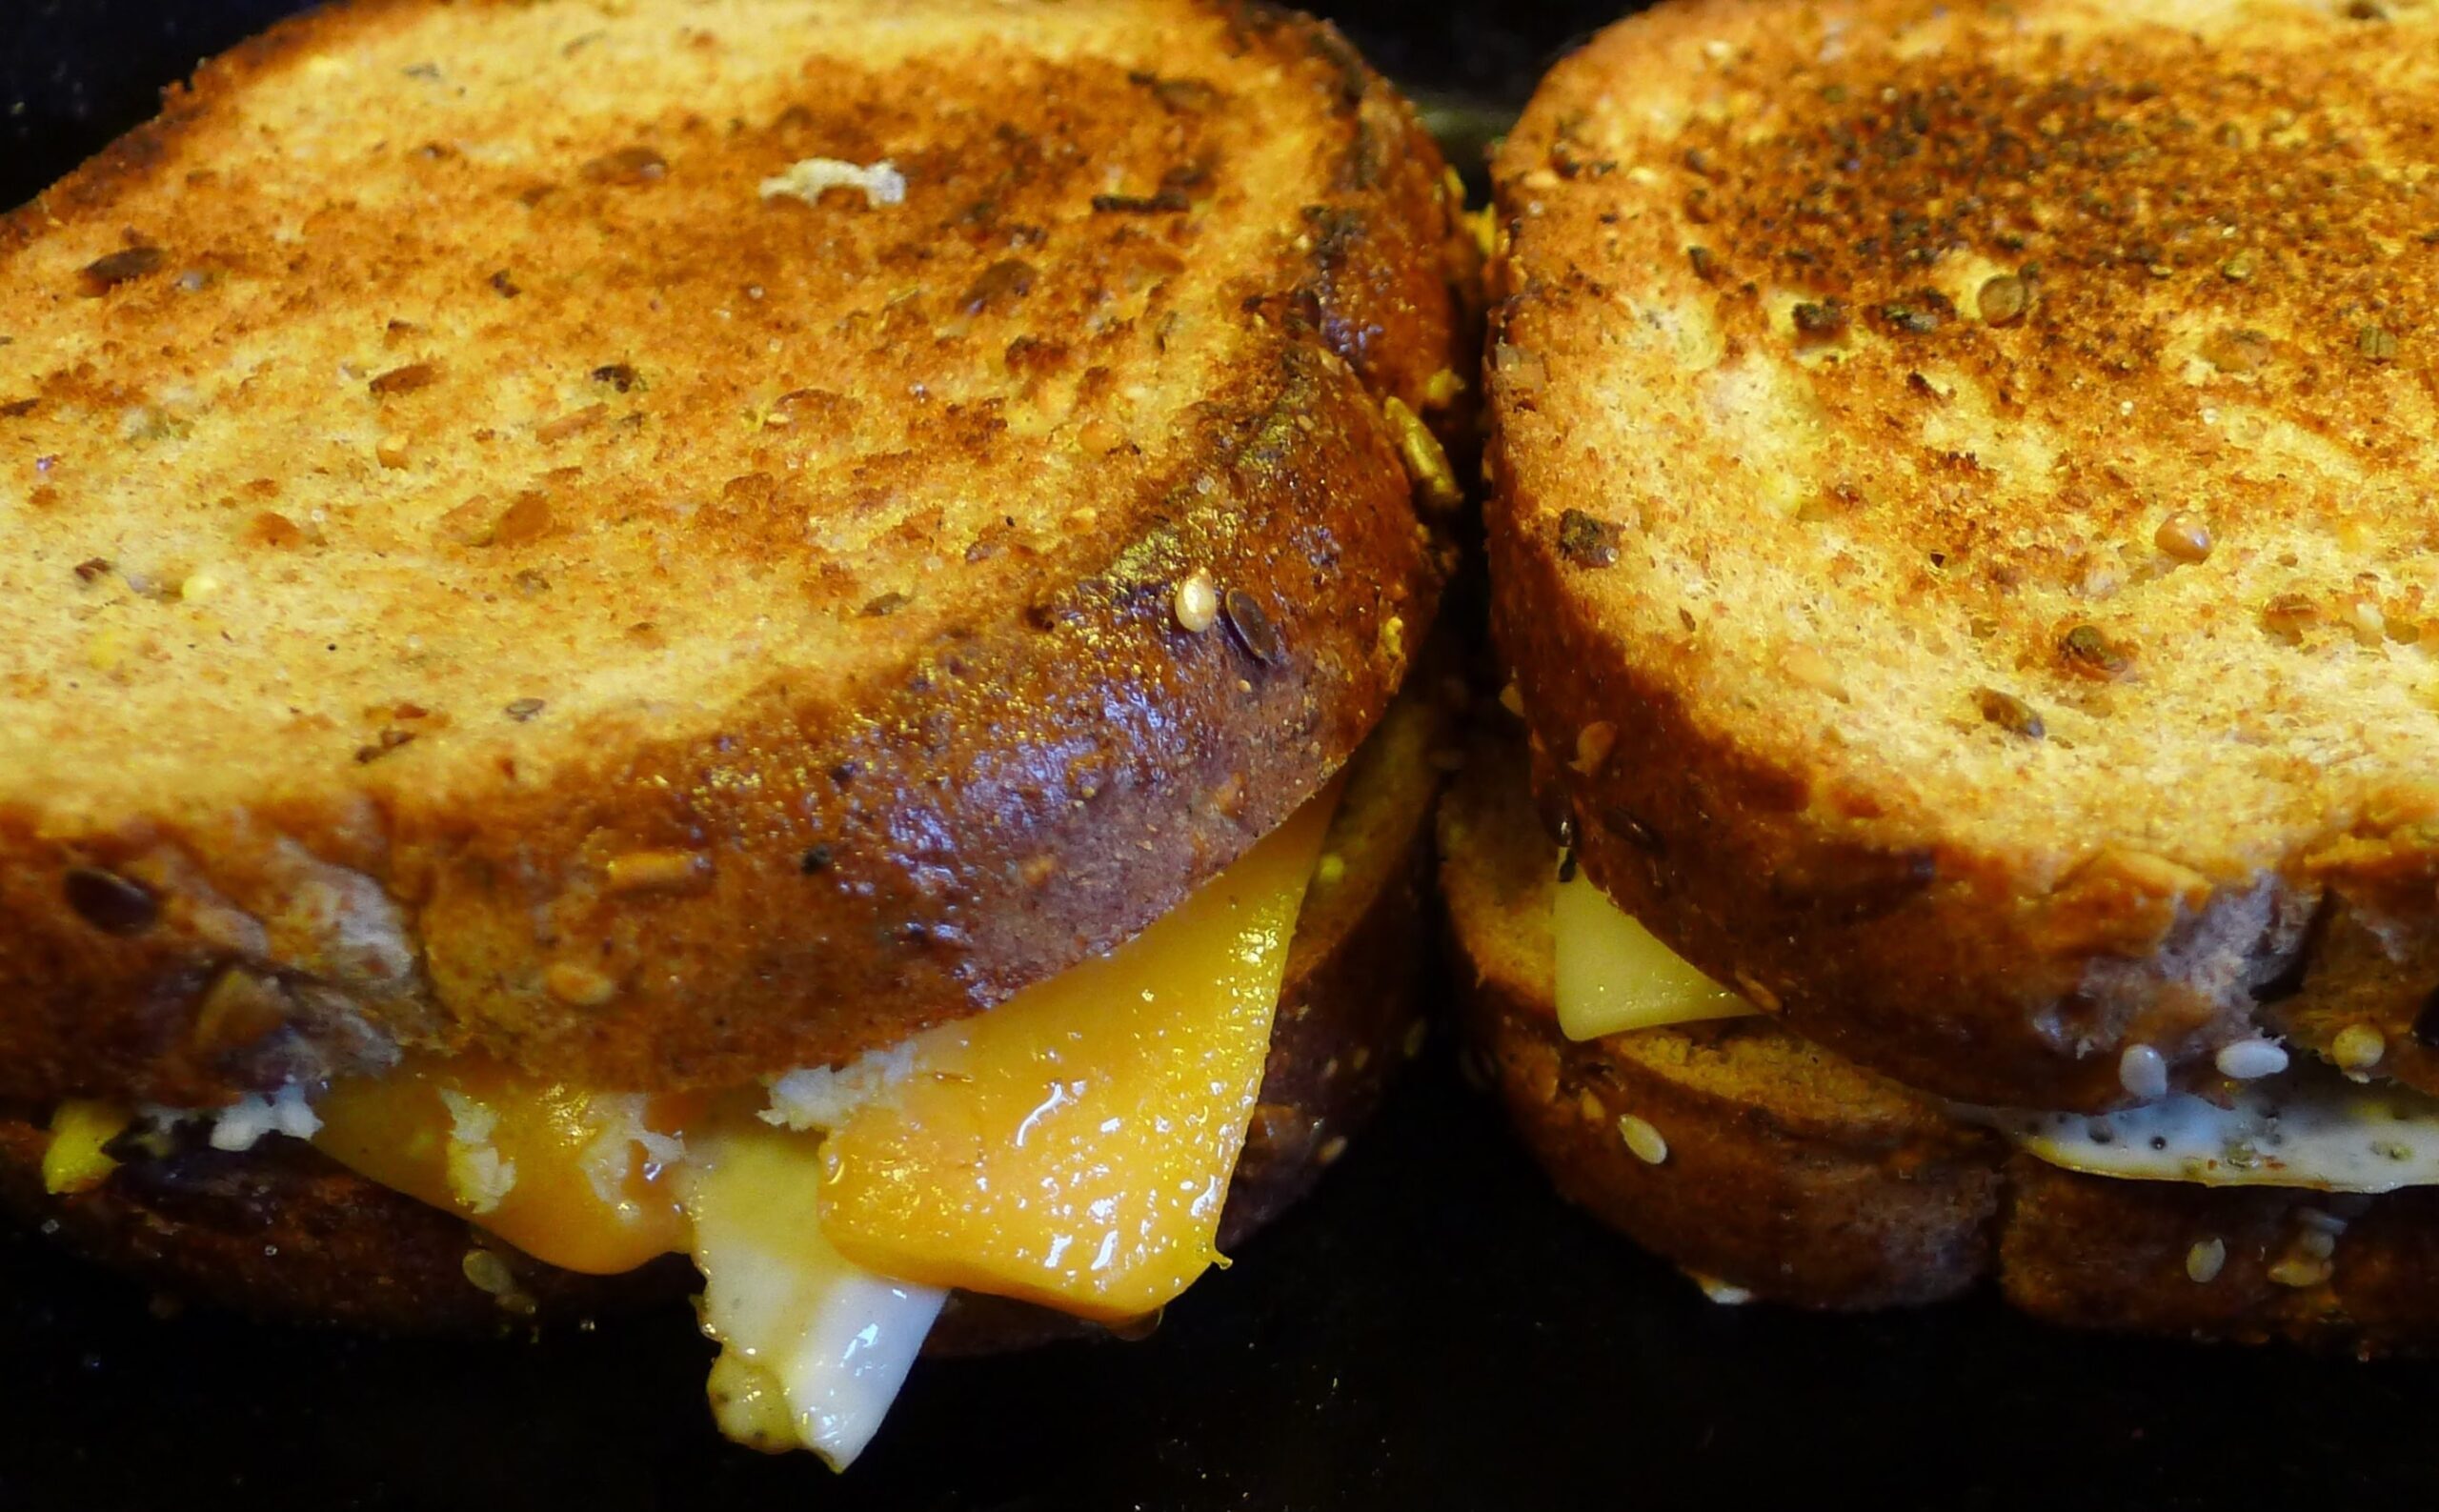 Grilled Cheese Sandwich from Colchester Sandwich Shop Bon Appetit